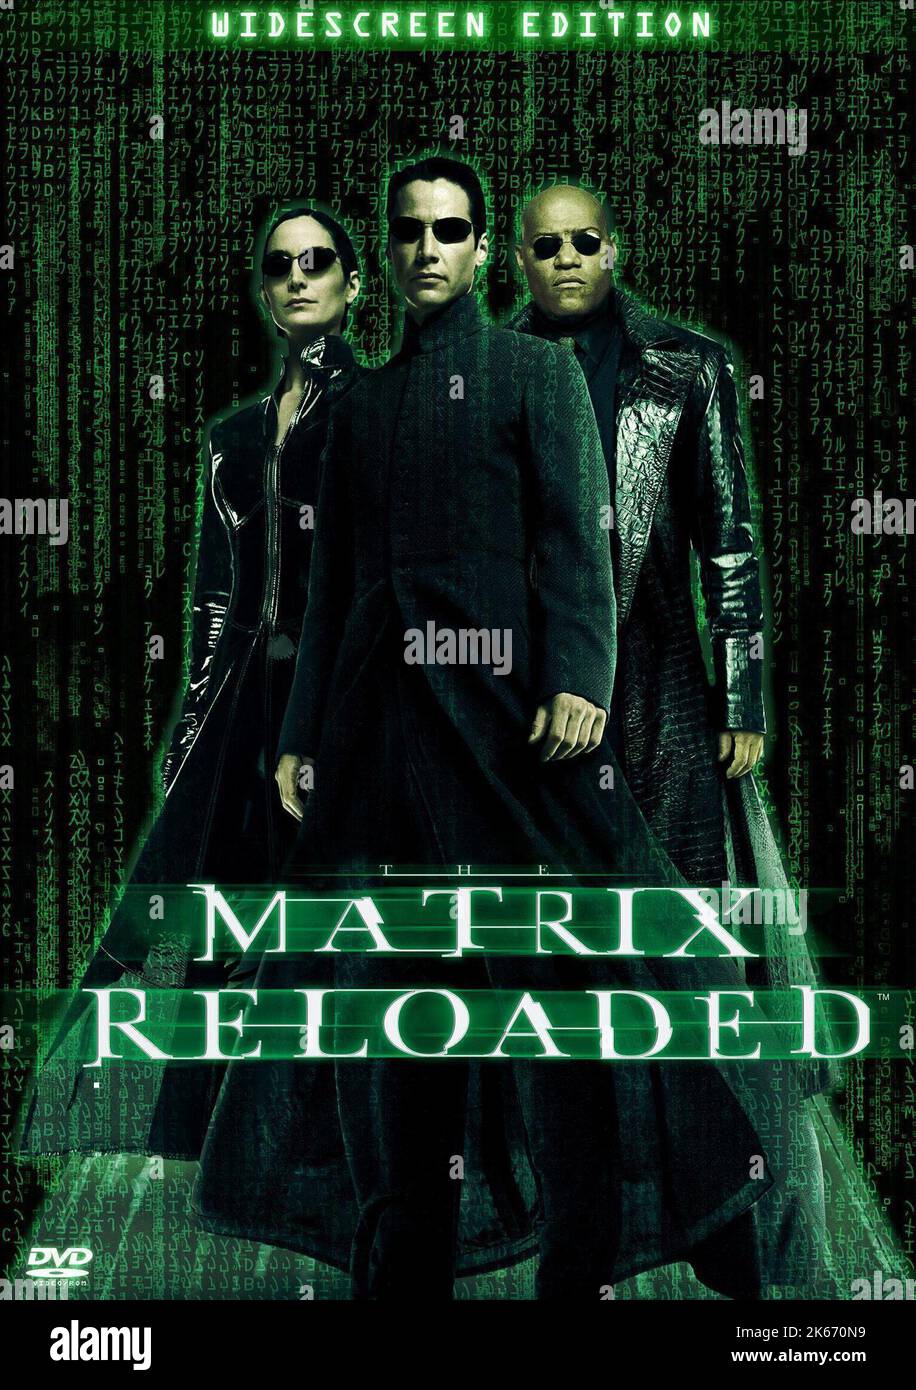 CARRIE-ANNE MOSS, KEANU REEVES, LAURENCE FISHBURNE, THE MATRIX RELOADED, 2003 Stock Photo